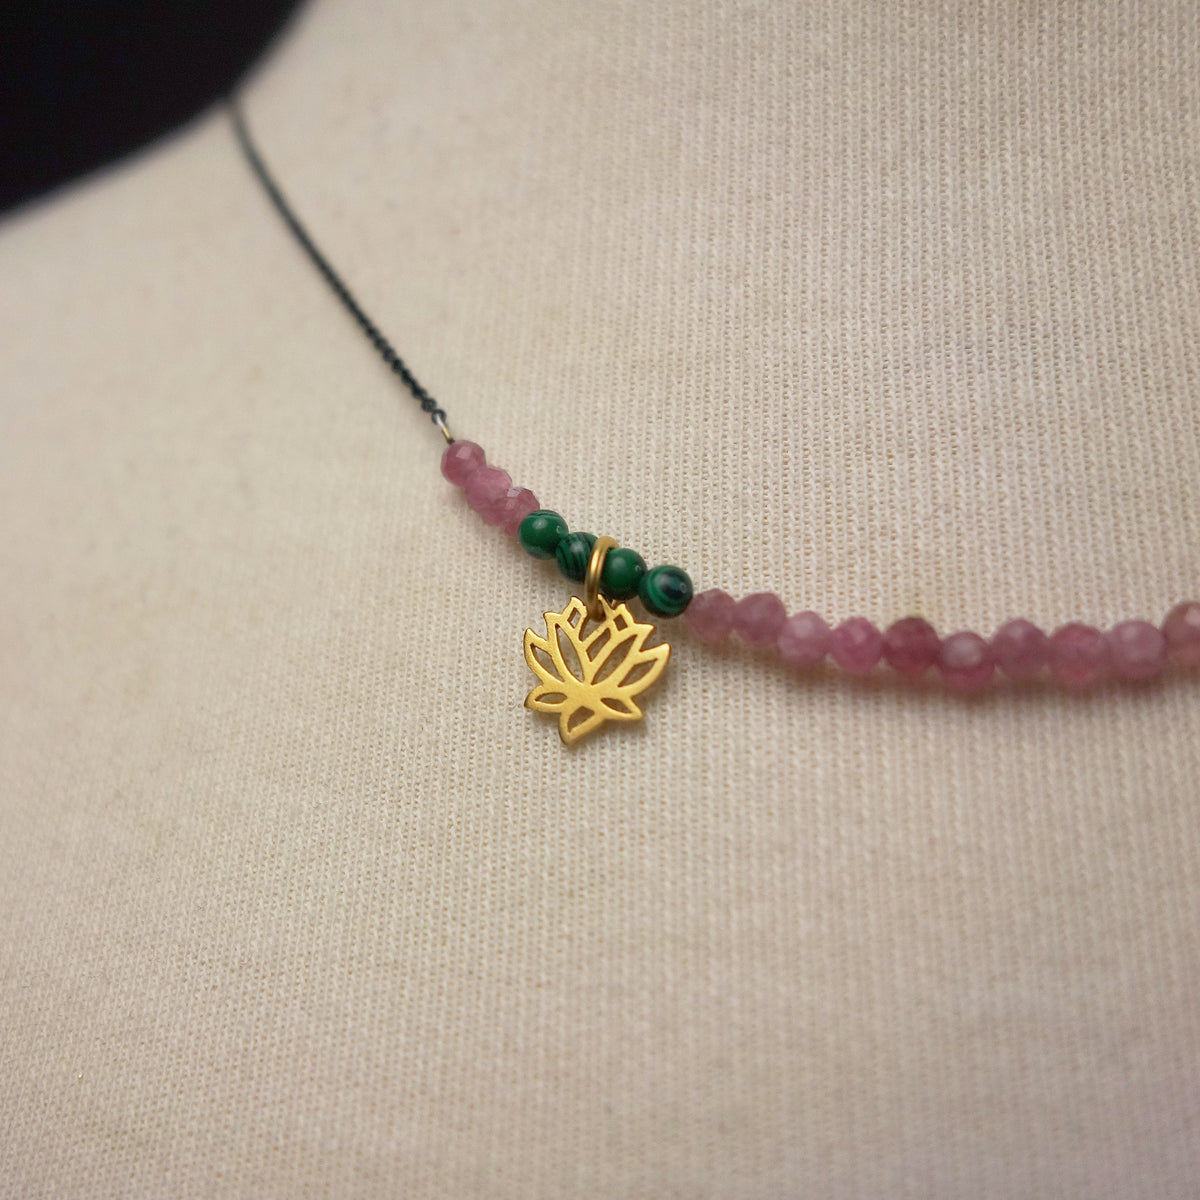 She Let Herself be Tended to: tourmaline/malachite necklace